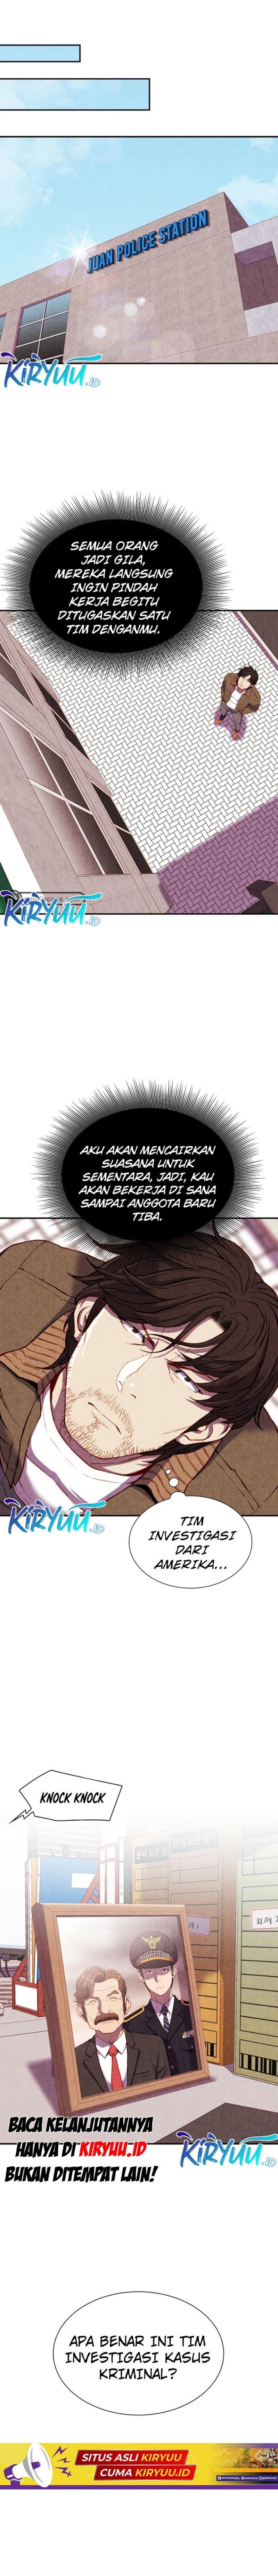 Good Hunting Chapter 06